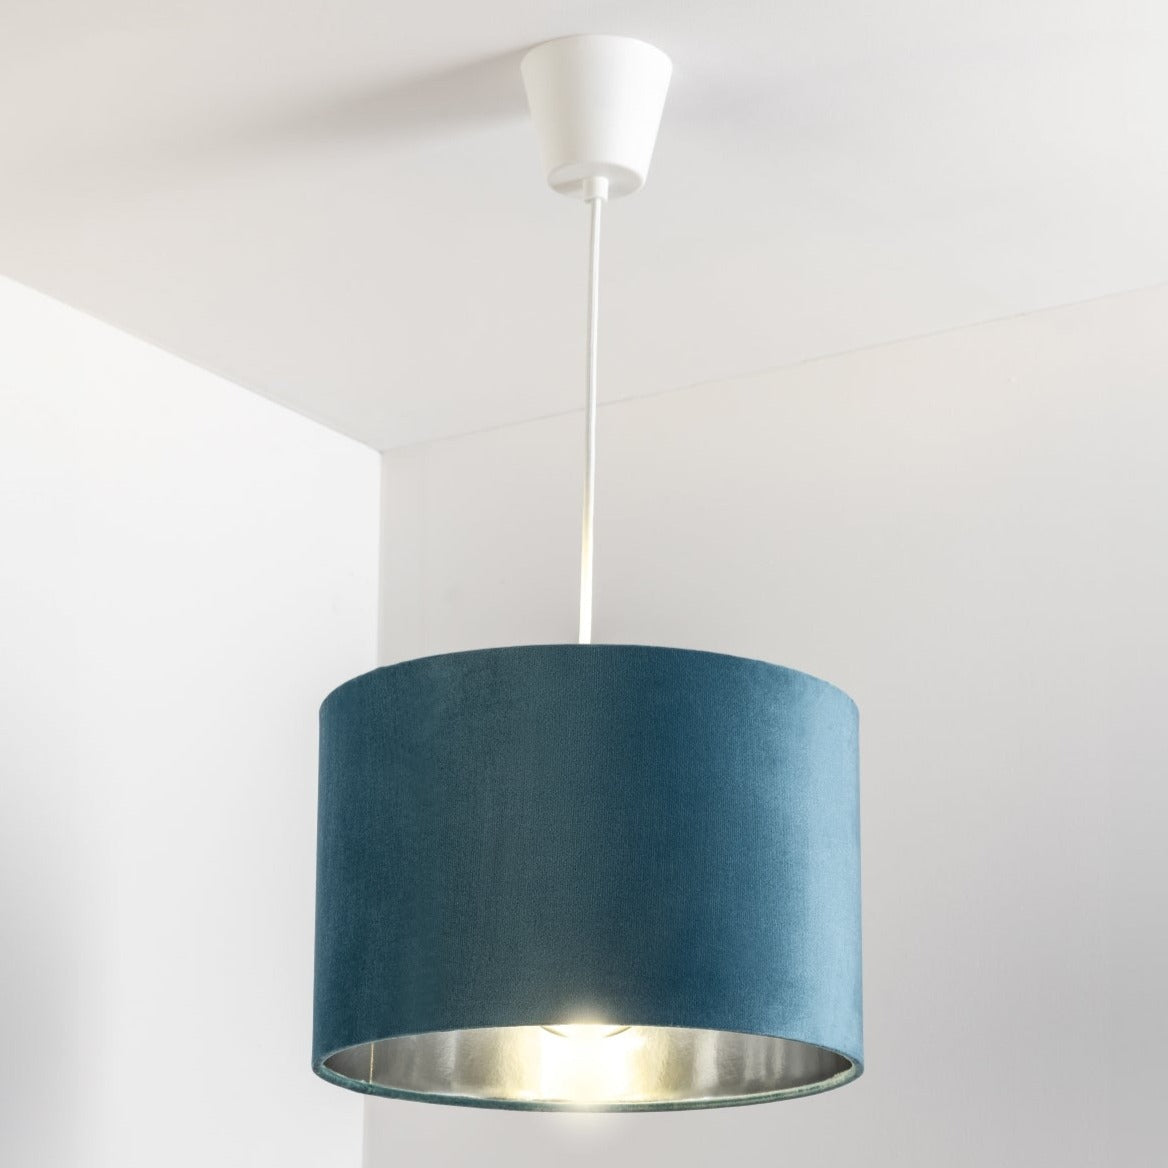 Our Nila velvet shade is sophisticated in appearance and we have designed the shade to  suit a range of interiors. Easy to fit, it’s crafted from high-quality velvet on the outer and has a reflective silver metallic inner. It's made to fit both a ceiling light or lamp base.